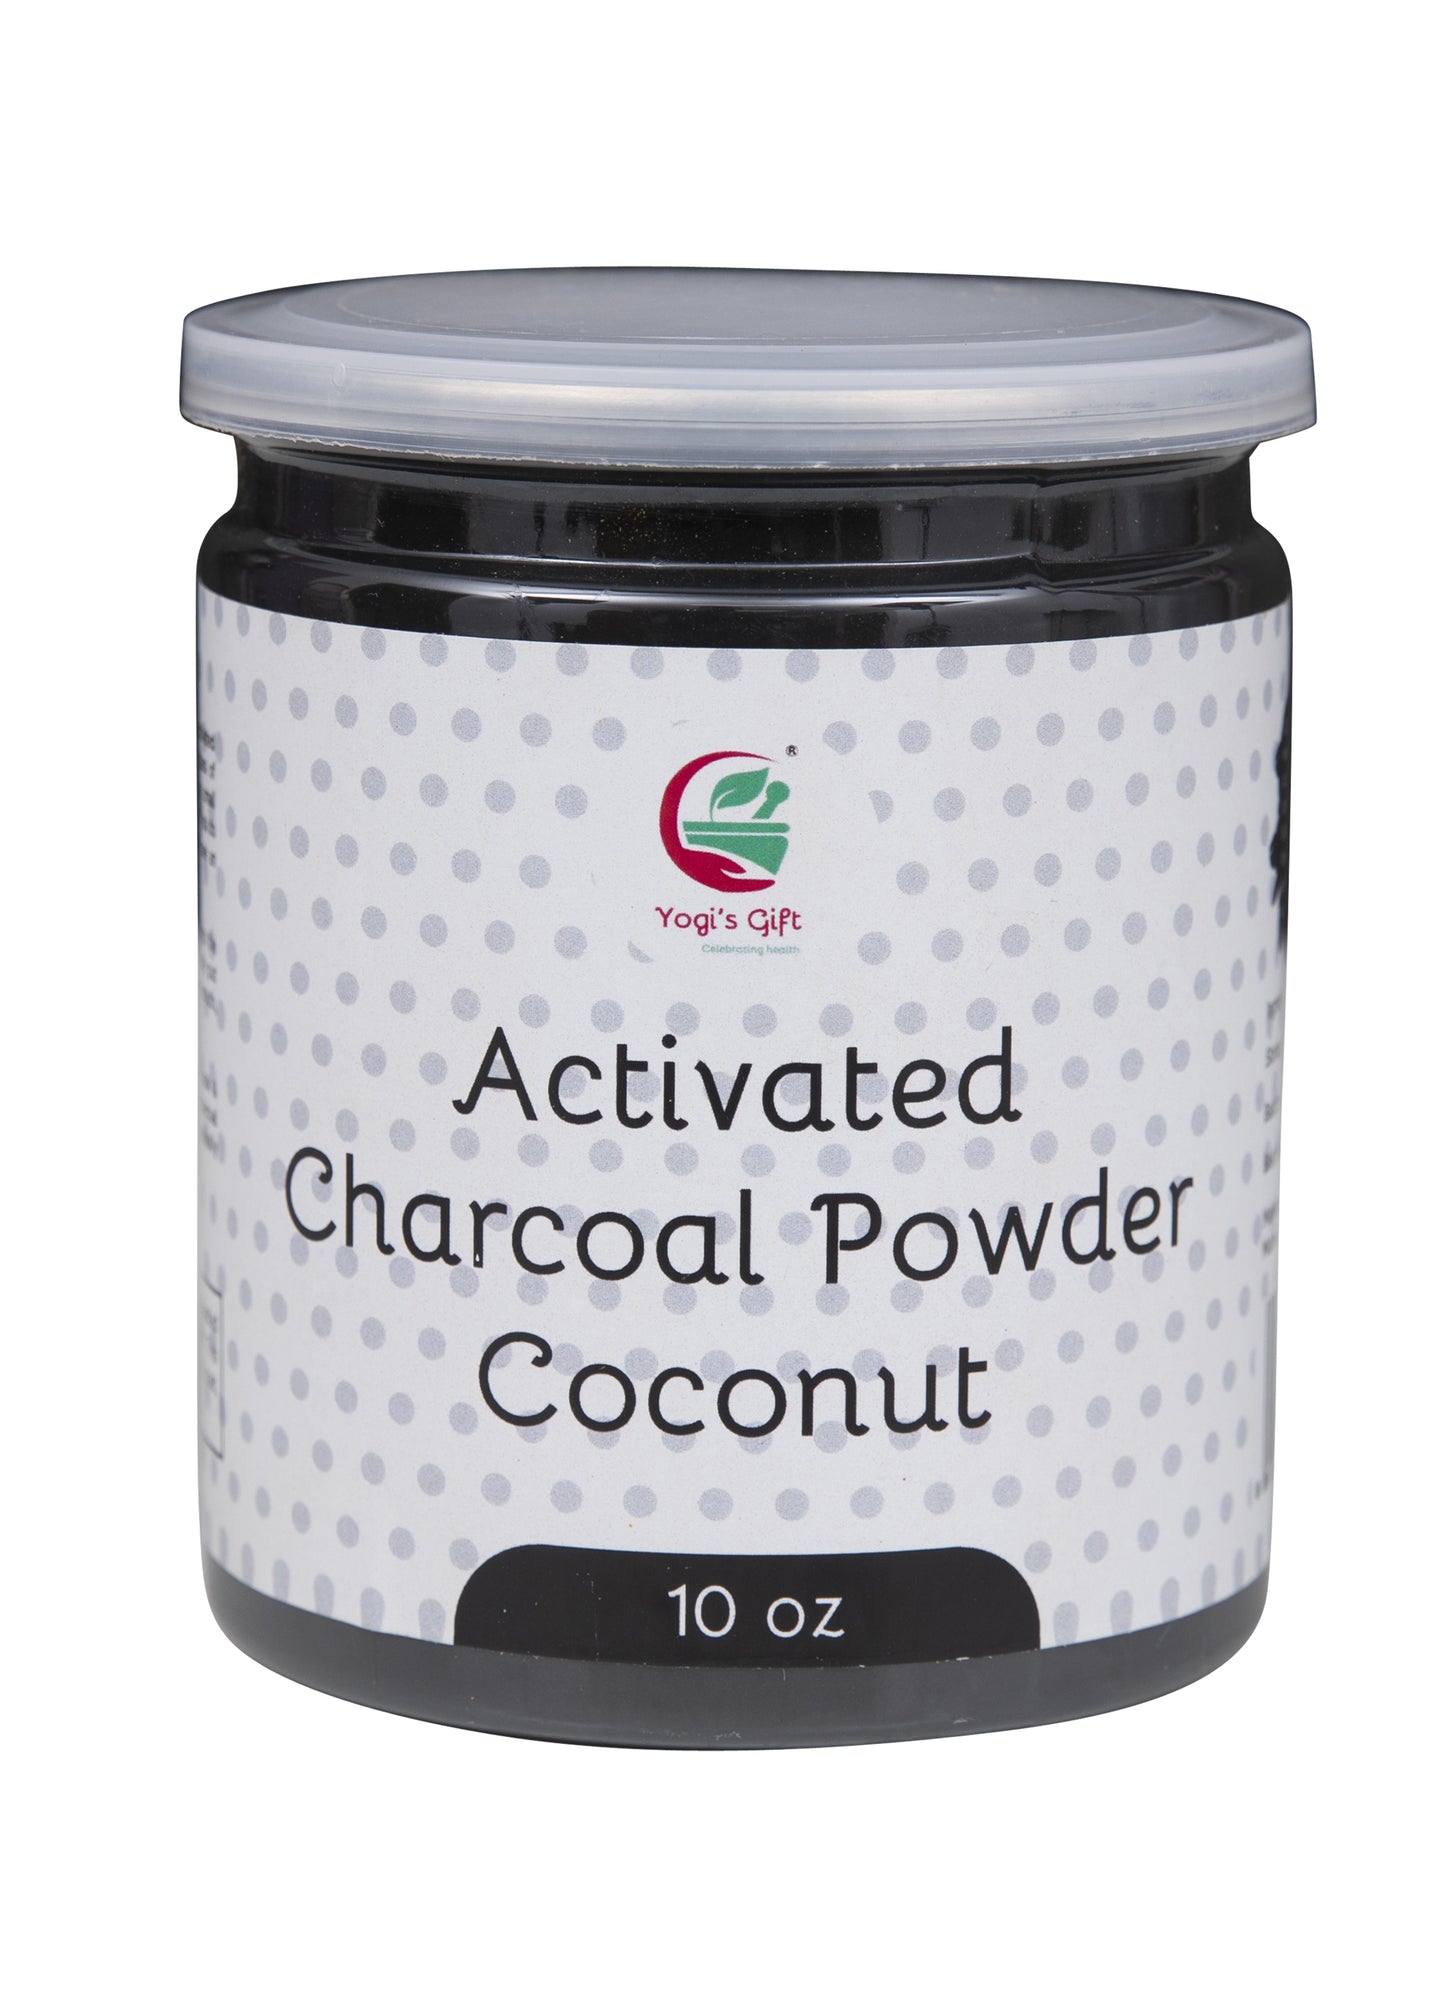 Activated Charcoal Powder Food Grade 10 oz | Perfect Particle Size for Smoothies, Teeth Whitening, Facial Mask | Coconut Shells Based | by Yogi's Gift ®